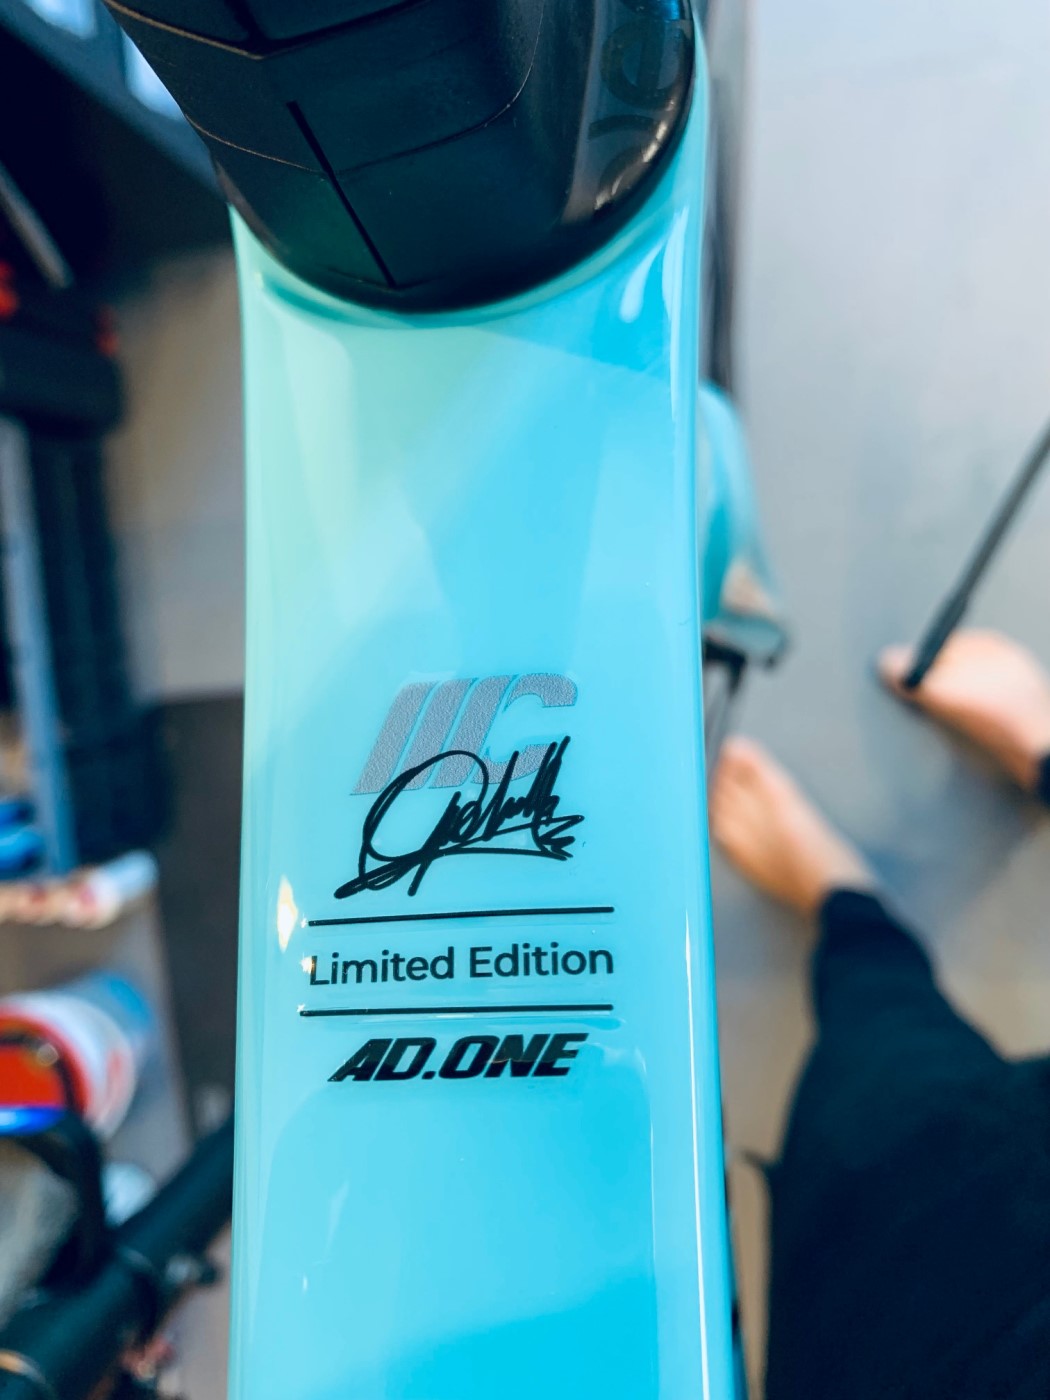 AD.ONE limited edition